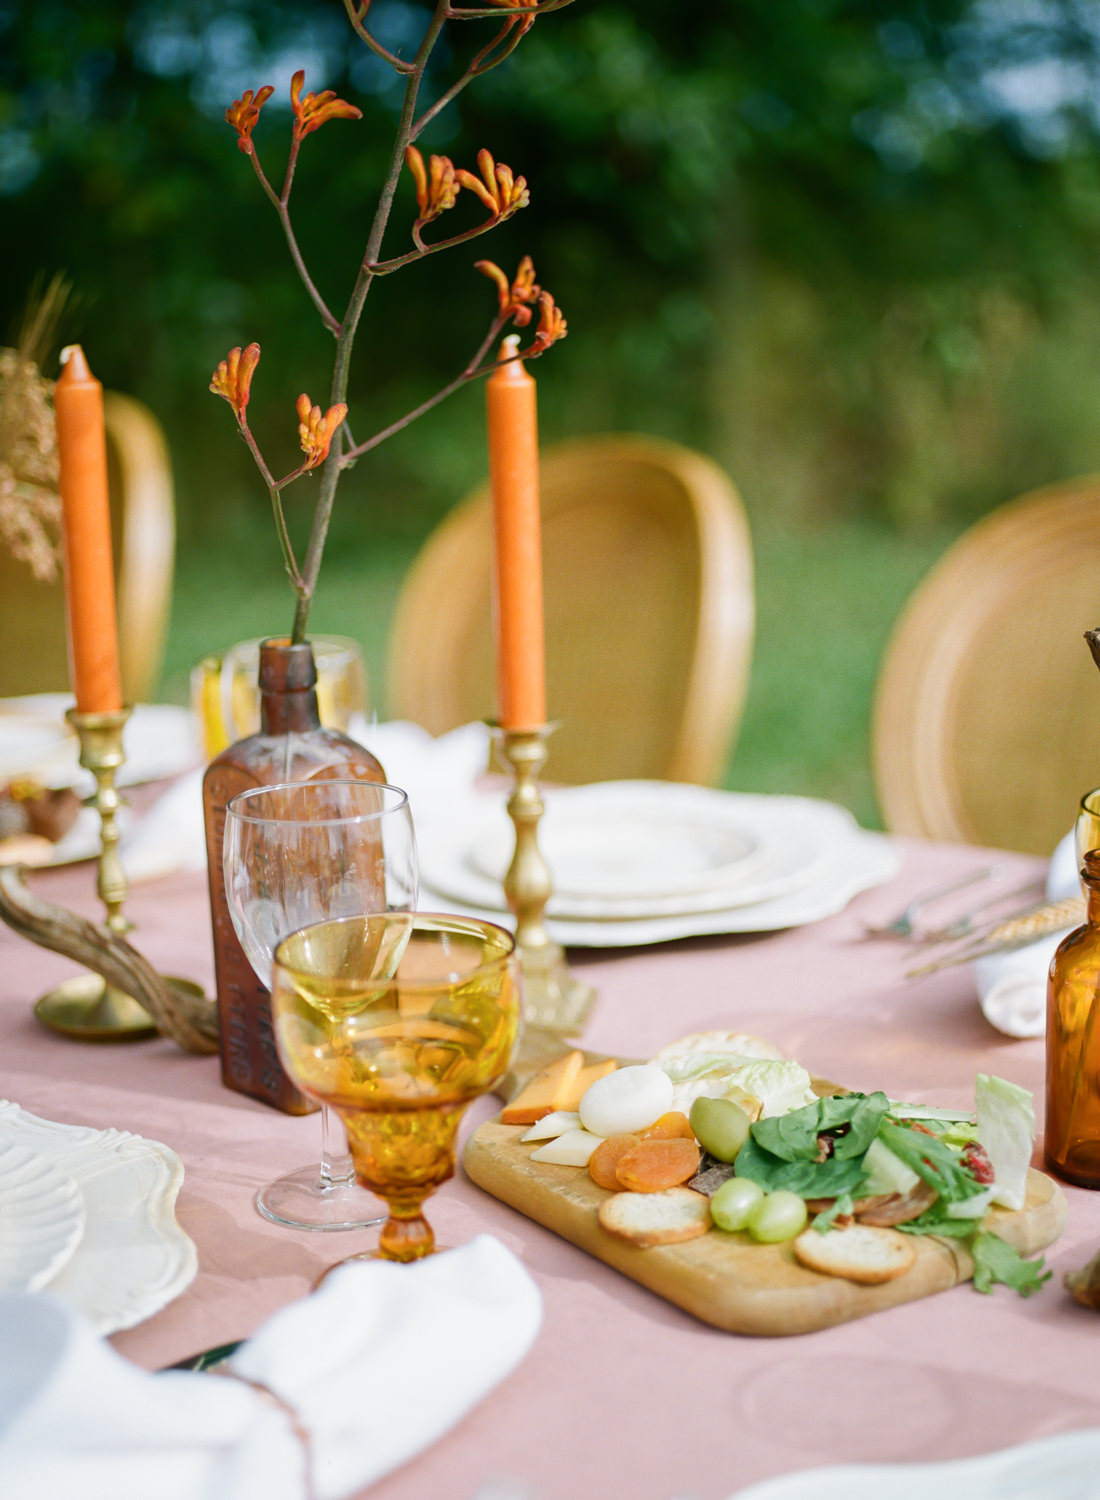 Amber colored glass, orange taper candles, autumn florals, vintage china, rose velvet tablecloth, pumpkin decor; Thanksgiving table at Emerson Fields; St. Louis fine art film wedding photographer Erica Robnett Photography